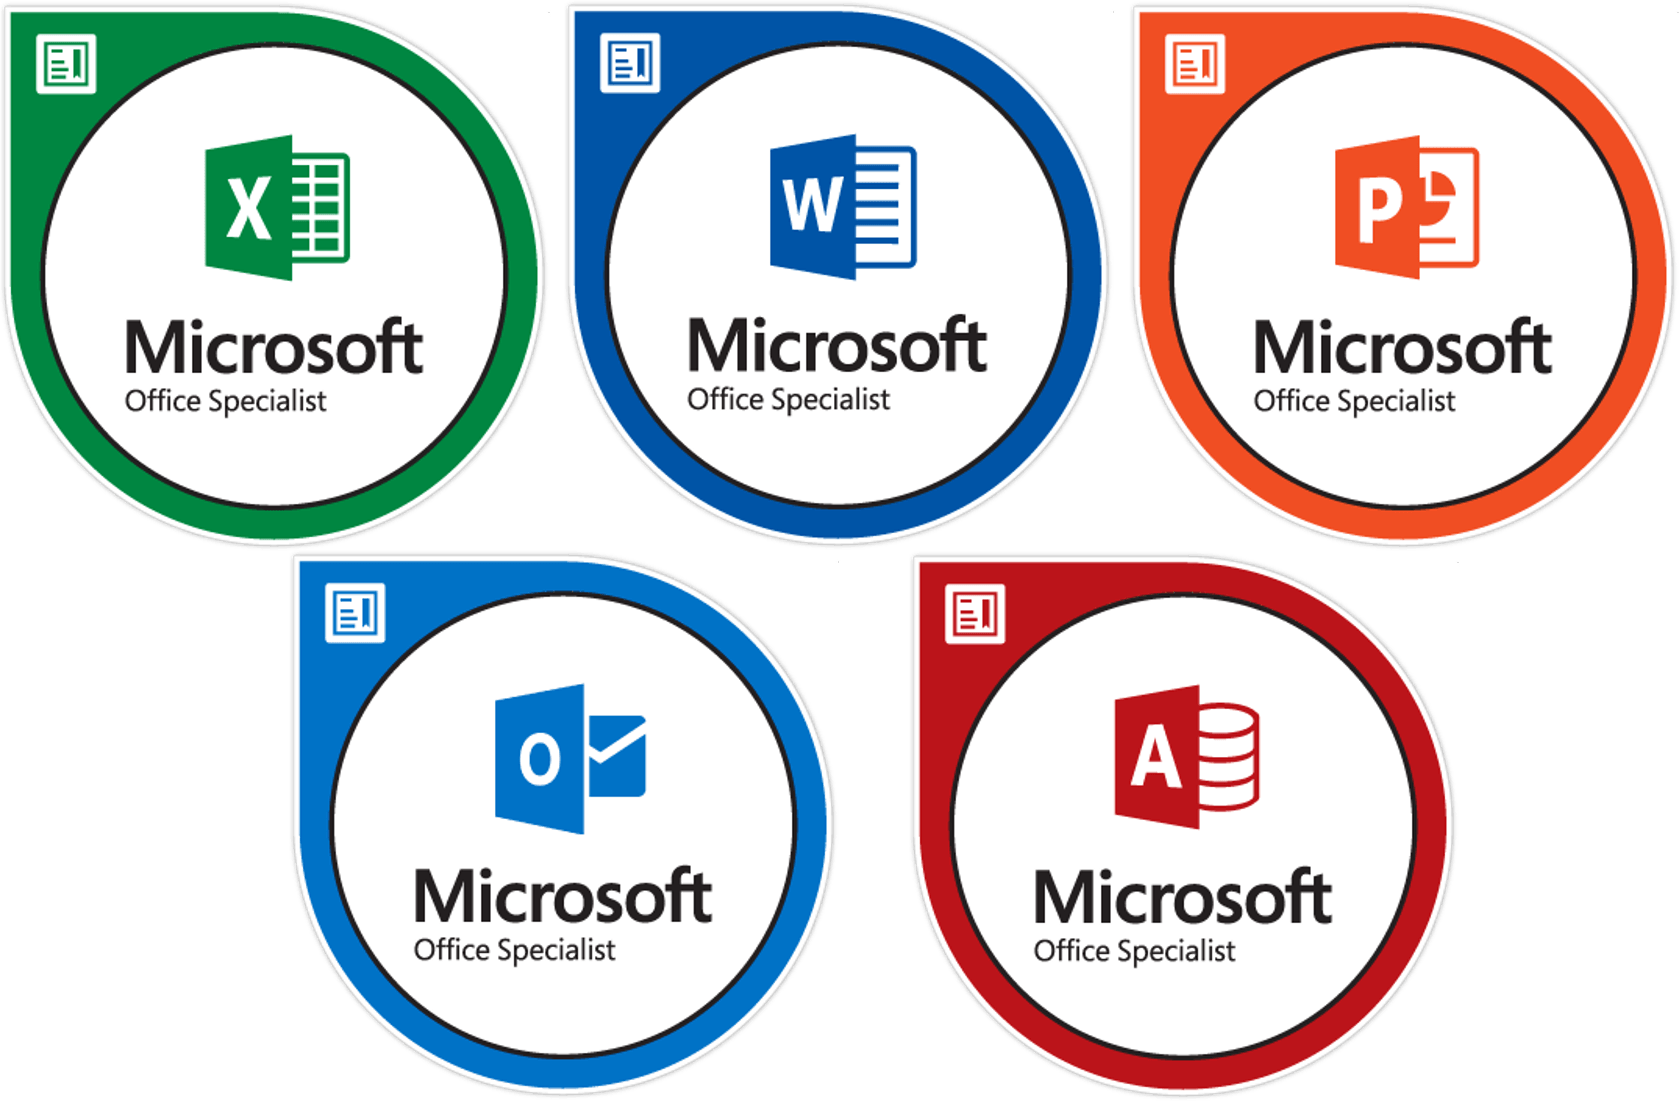 MS Office Suite Logo - Microsoft Office Specialist Certification for Office 2016 ...